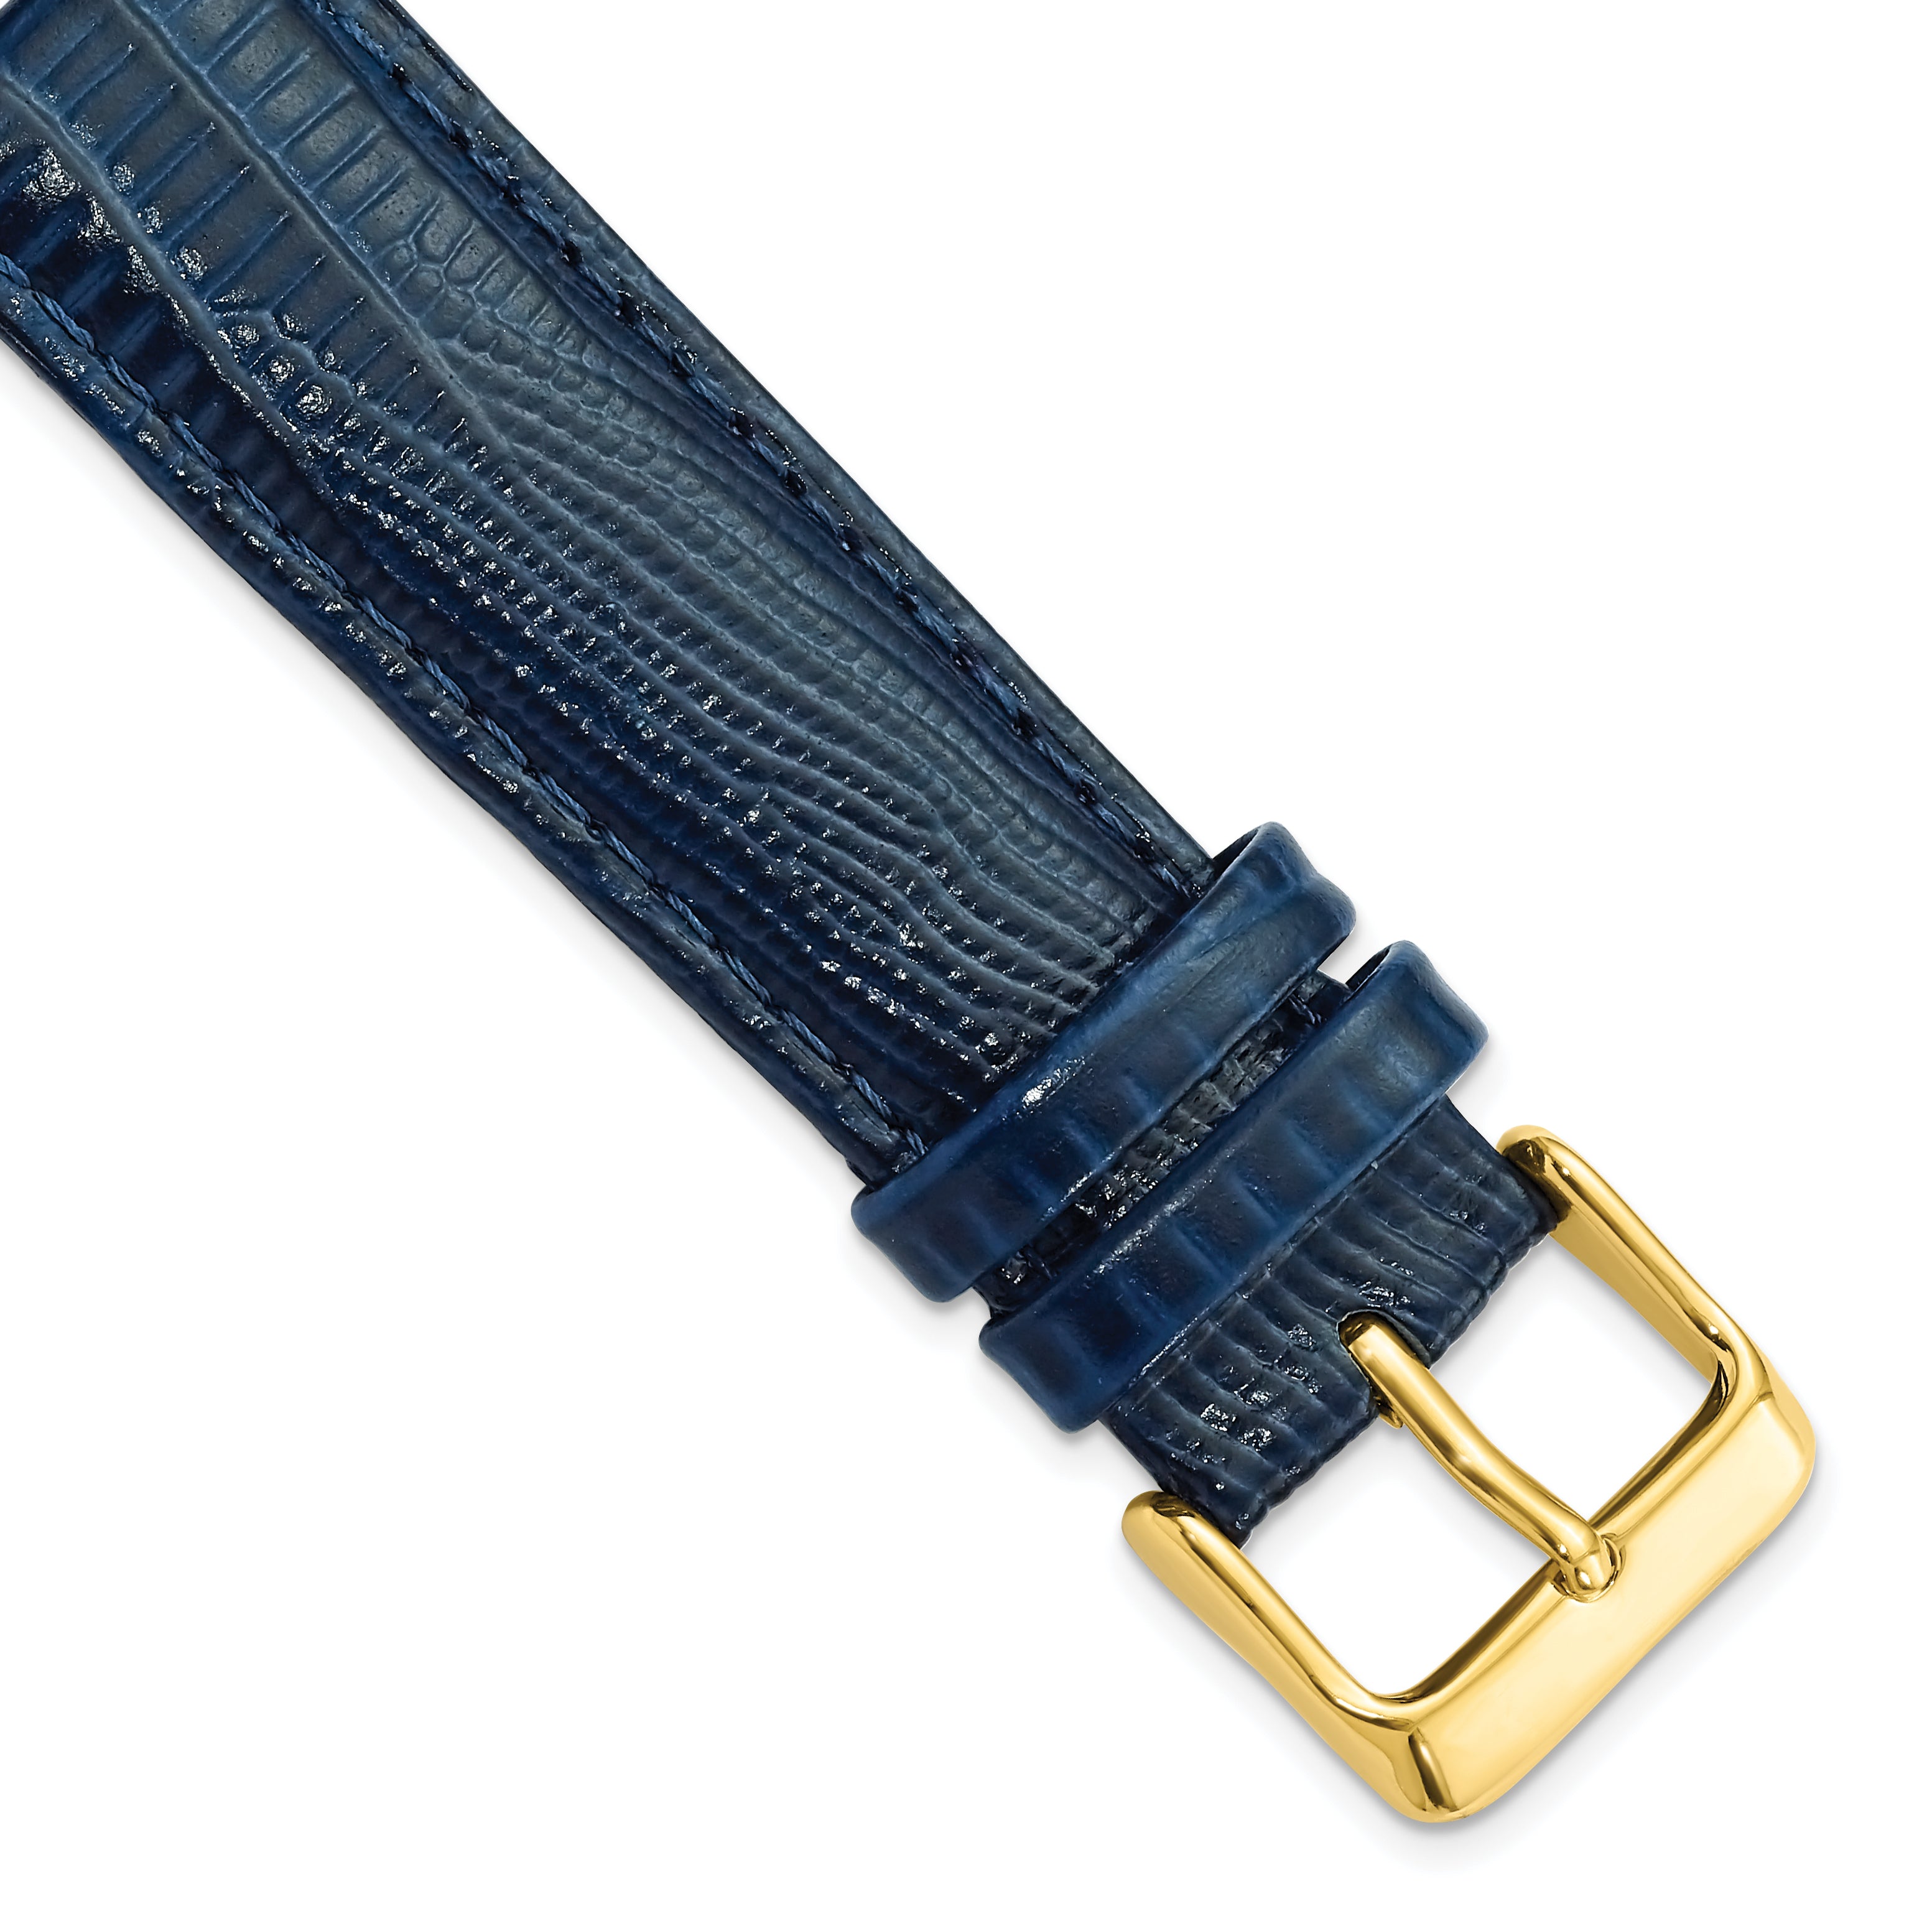 DeBeer 20mm Navy Teju Liz Grain Leather with Gold-tone Buckle 7.5 inch Watch Band